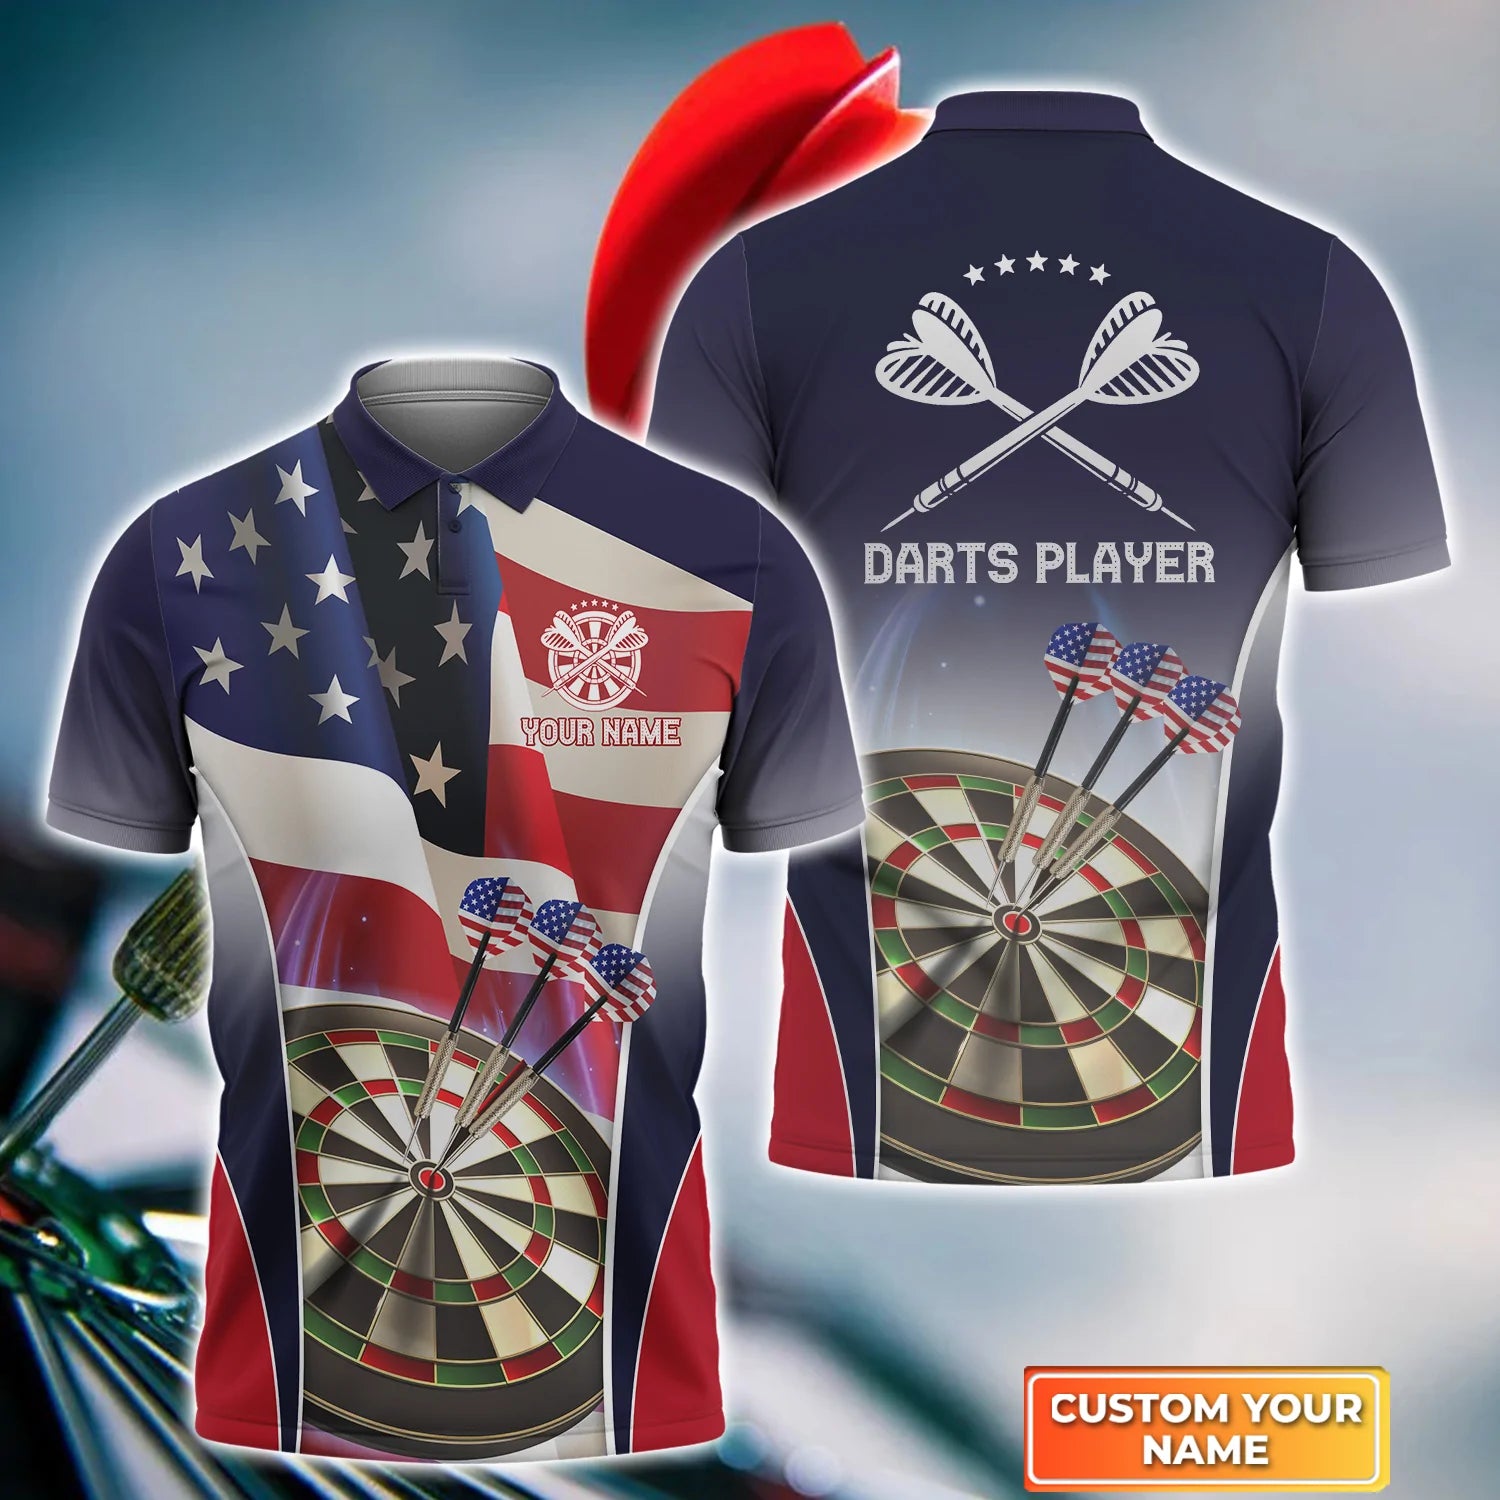 Polo 3D Shirt for American Darts Players: Ideal for Dart Teams, Sports Enthusiasts, and Dart Shirt Fans – DP120